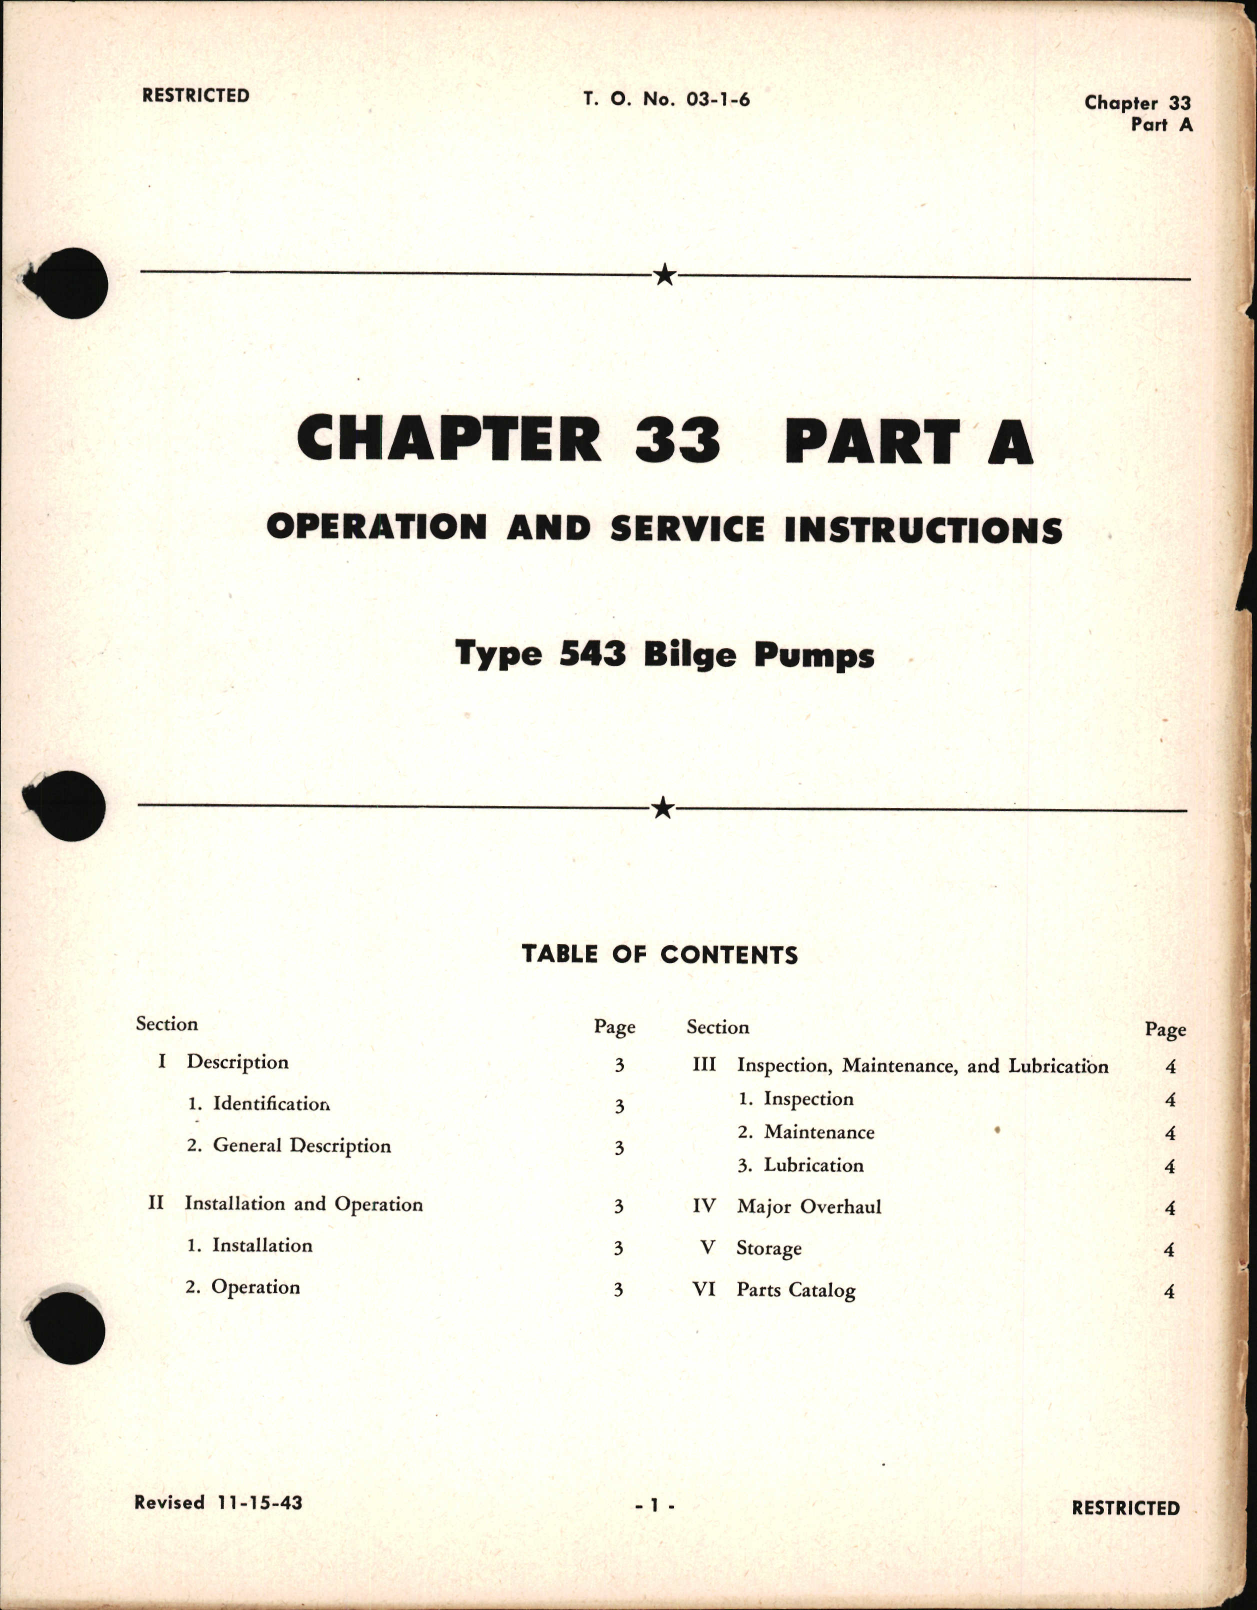 Sample page 1 from AirCorps Library document: Operation & Service Instructions for Bilge Pumps, Chapter 33 Part A